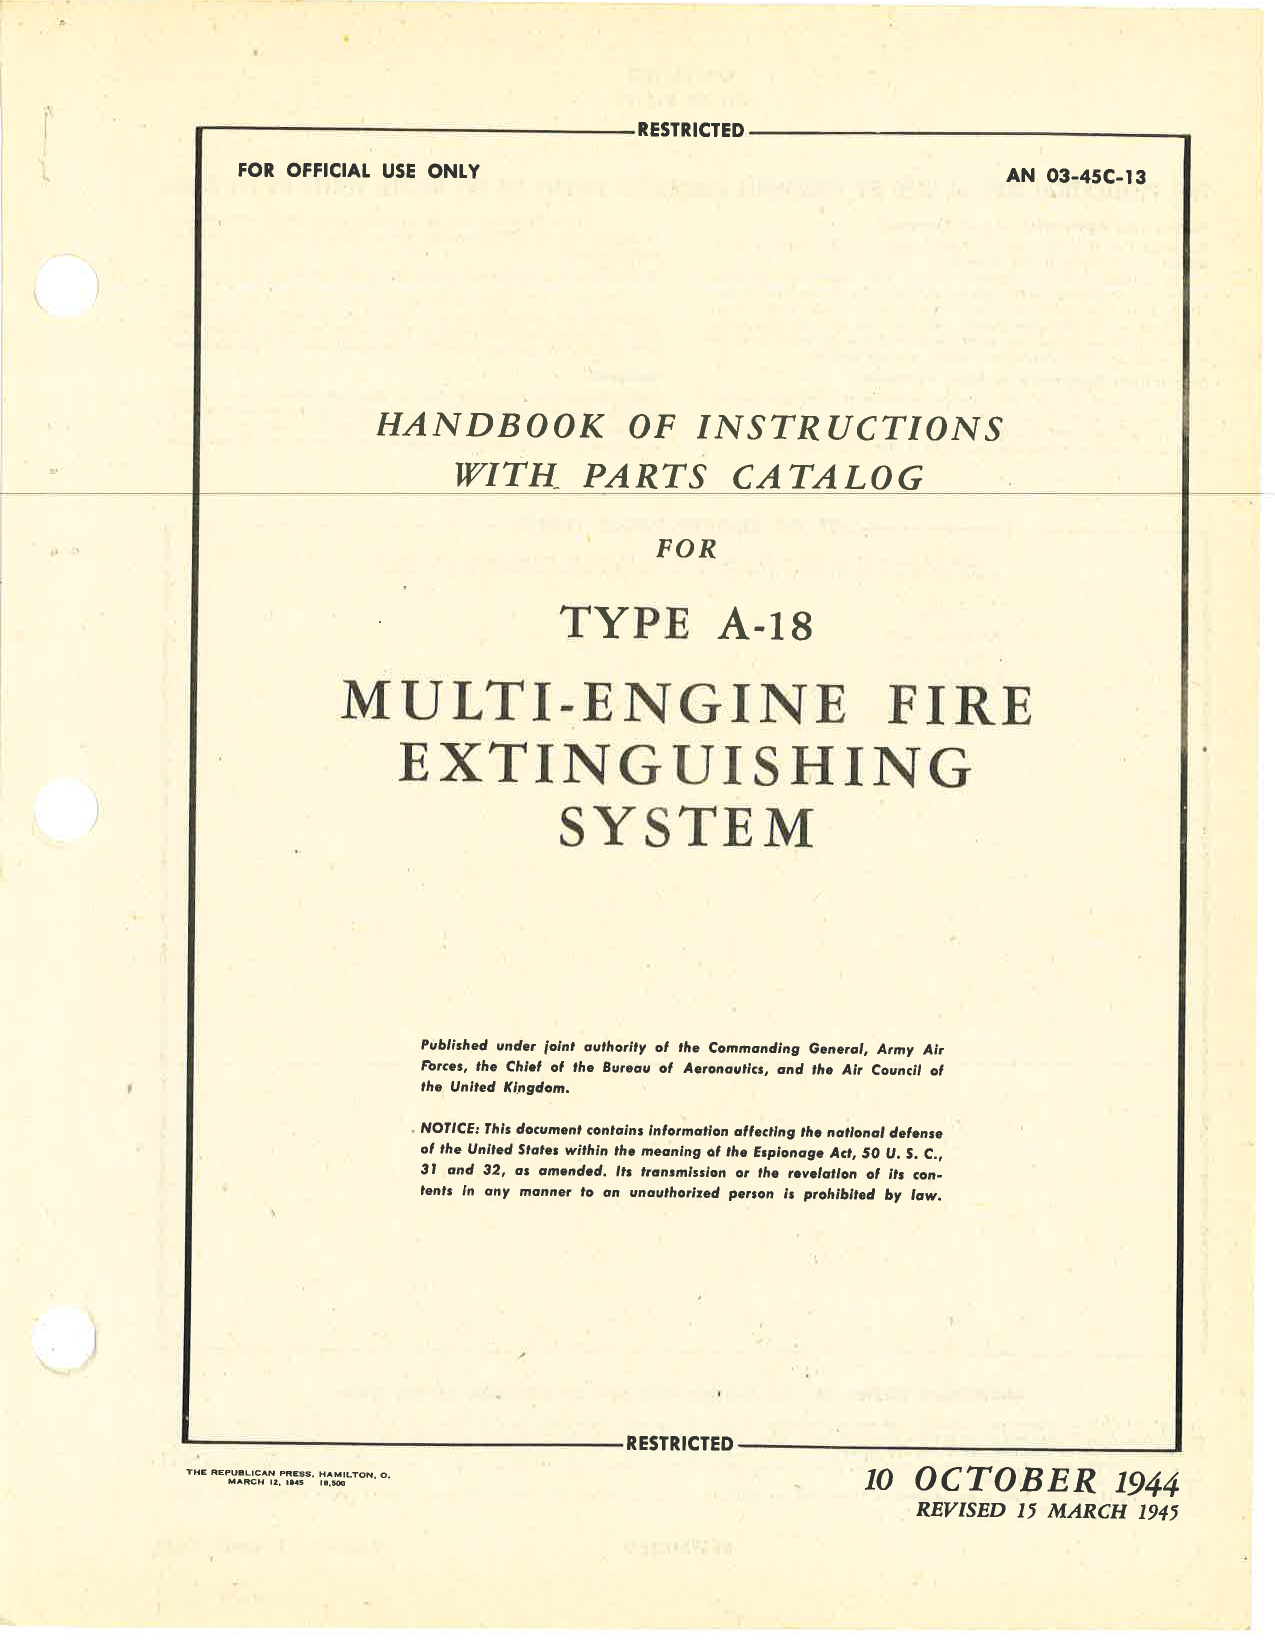 Sample page 3 from AirCorps Library document: Handbook of Instructions with Parts Catalog for Type A-18 Multi-Engine Fire Extinguishing System